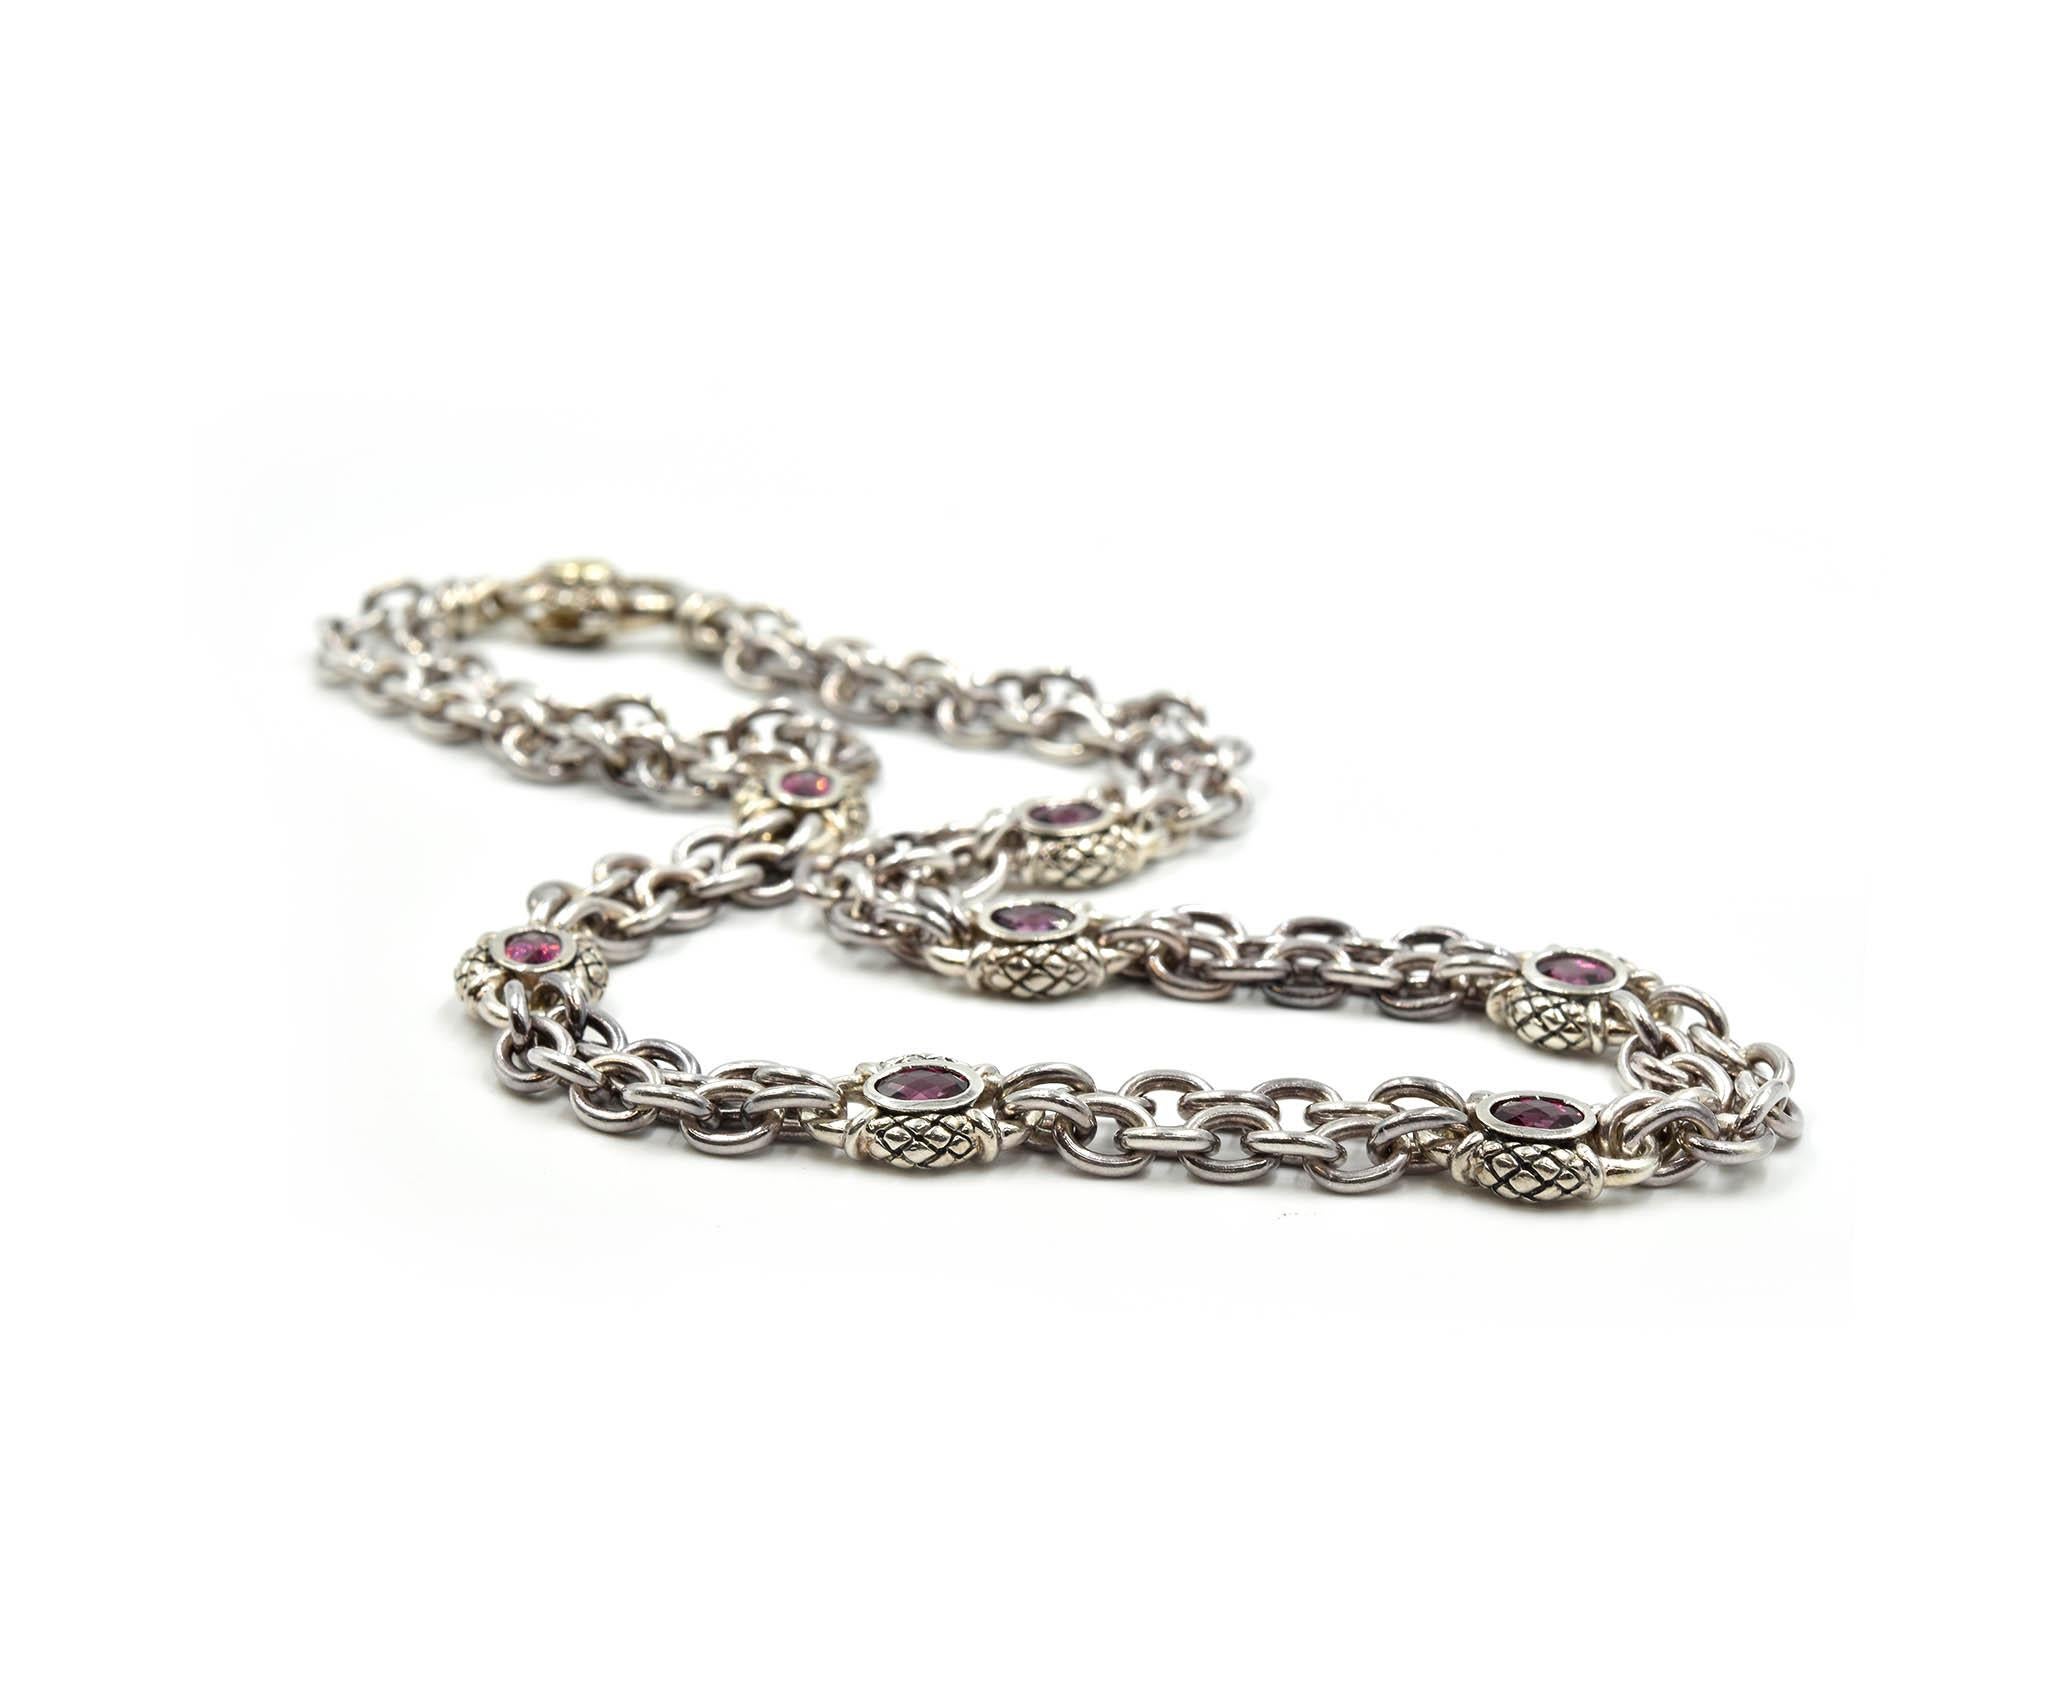 A beautiful piece by designer Scott Kay! This necklace consists of sterling silver oval links and bezel set rhodolite garnets. Each of the seven rhodolite garnets are oval cut and measure approximately 6.23mm long x 4.53mm wide. The garnets are set